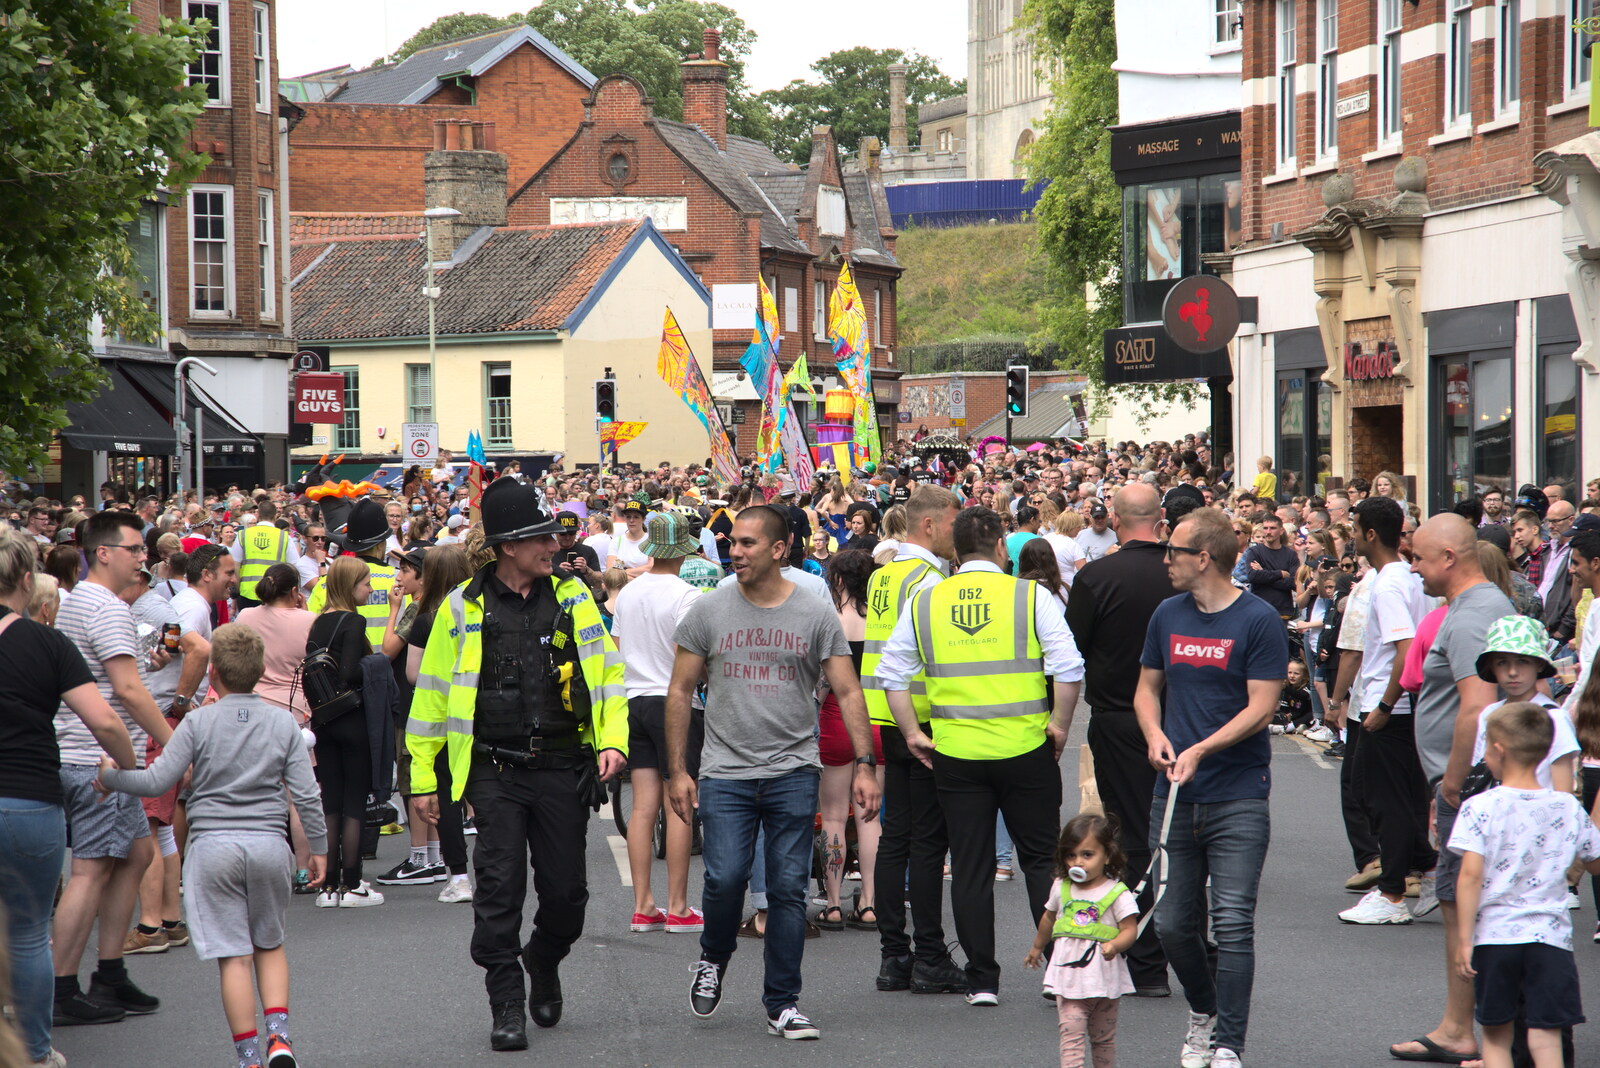 Large crowds follow the parade down the road from The Lord Mayor's Procession, Norwich, Norfolk - 2nd July 2022